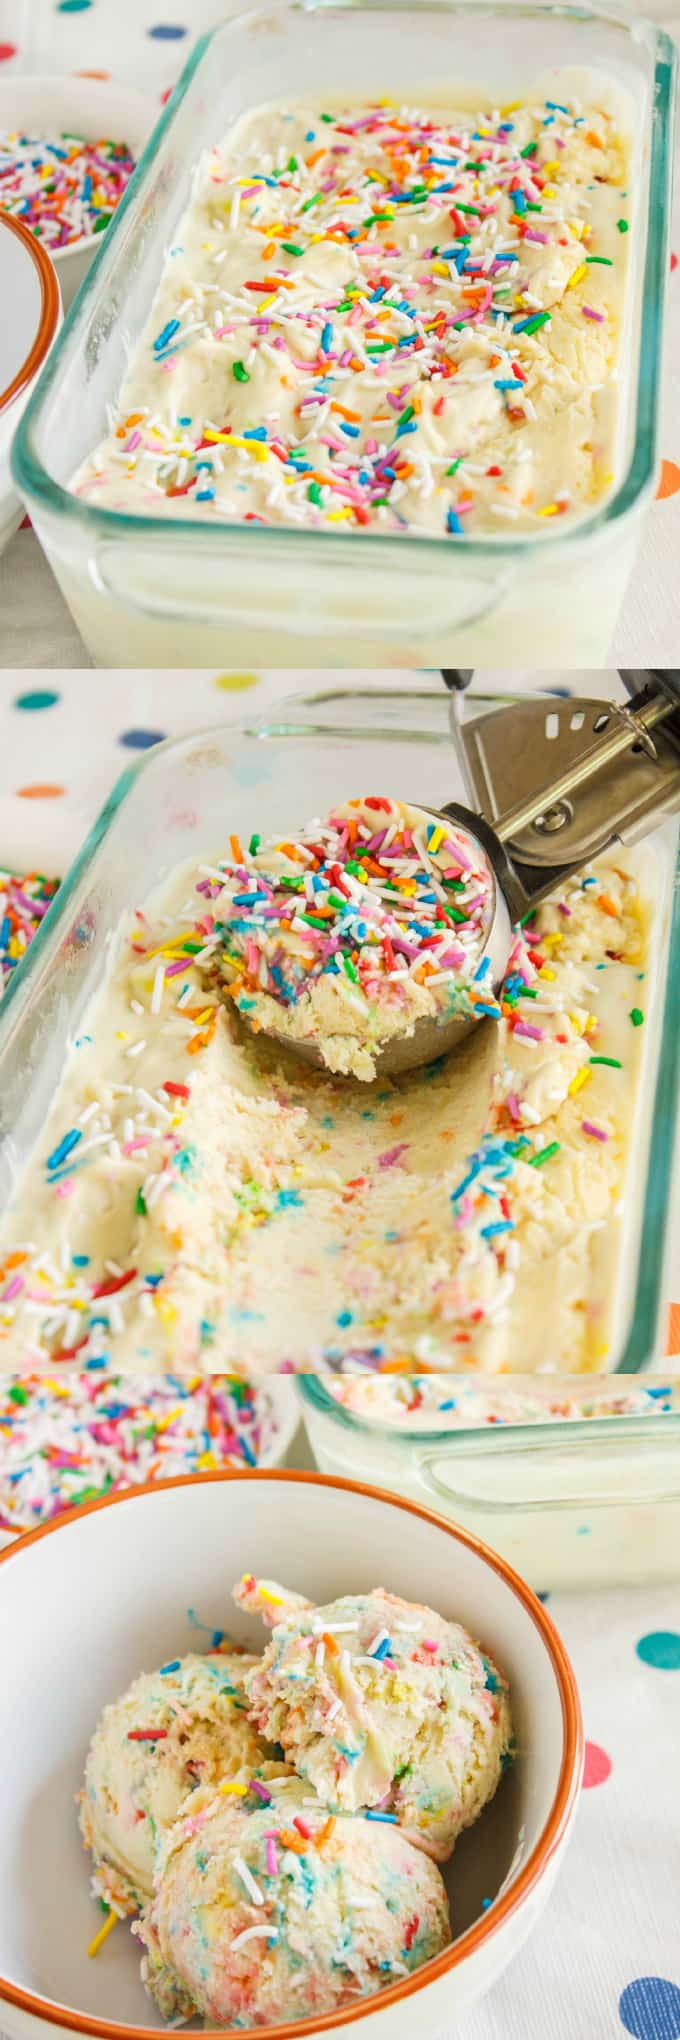 Homemade Birthday Cake Ice Cream in glass container, picked by ice cream spoon, ice cream in white orange bowl